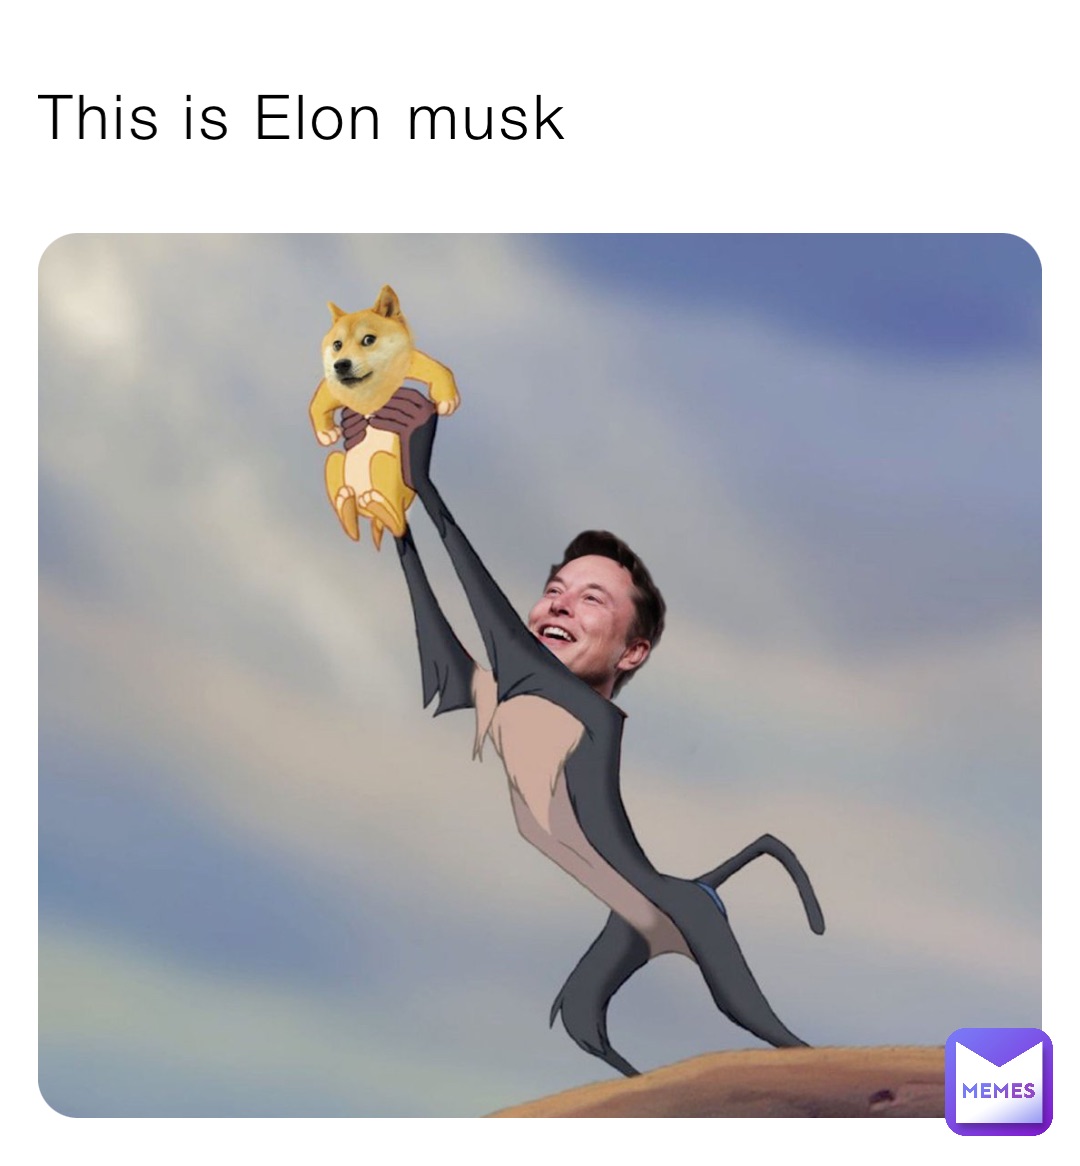 This is Elon musk